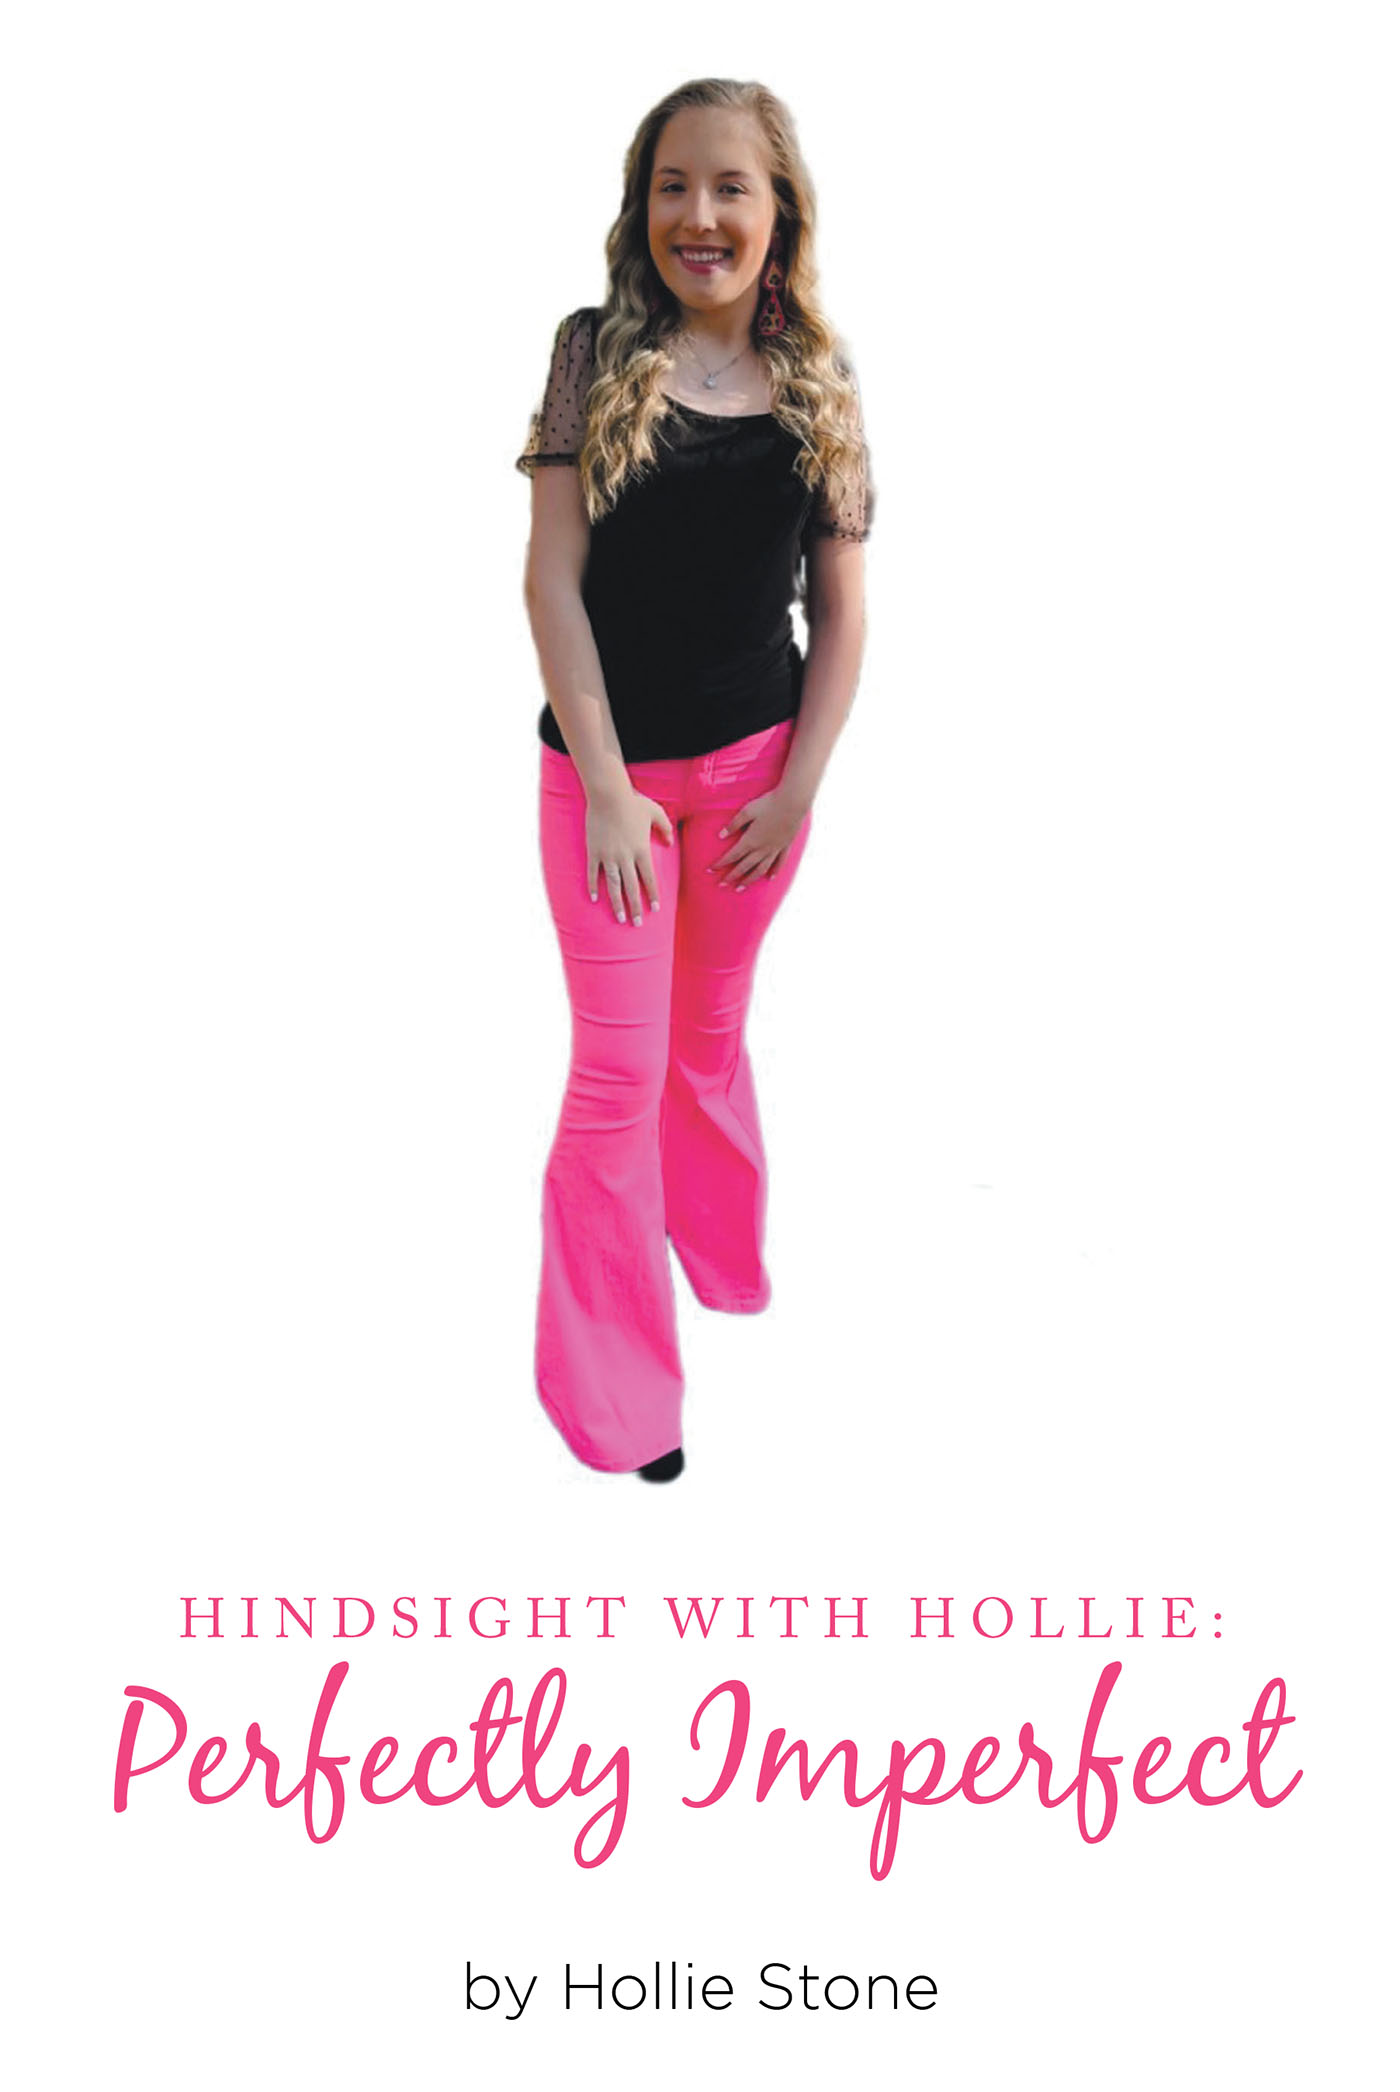 Hollie Stone’s New Book, "Hindsight with Hollie: Perfectly Imperfect," a Beautiful Series of Poems and Ruminations to Help Spread Positivity and Encouragement to Readers